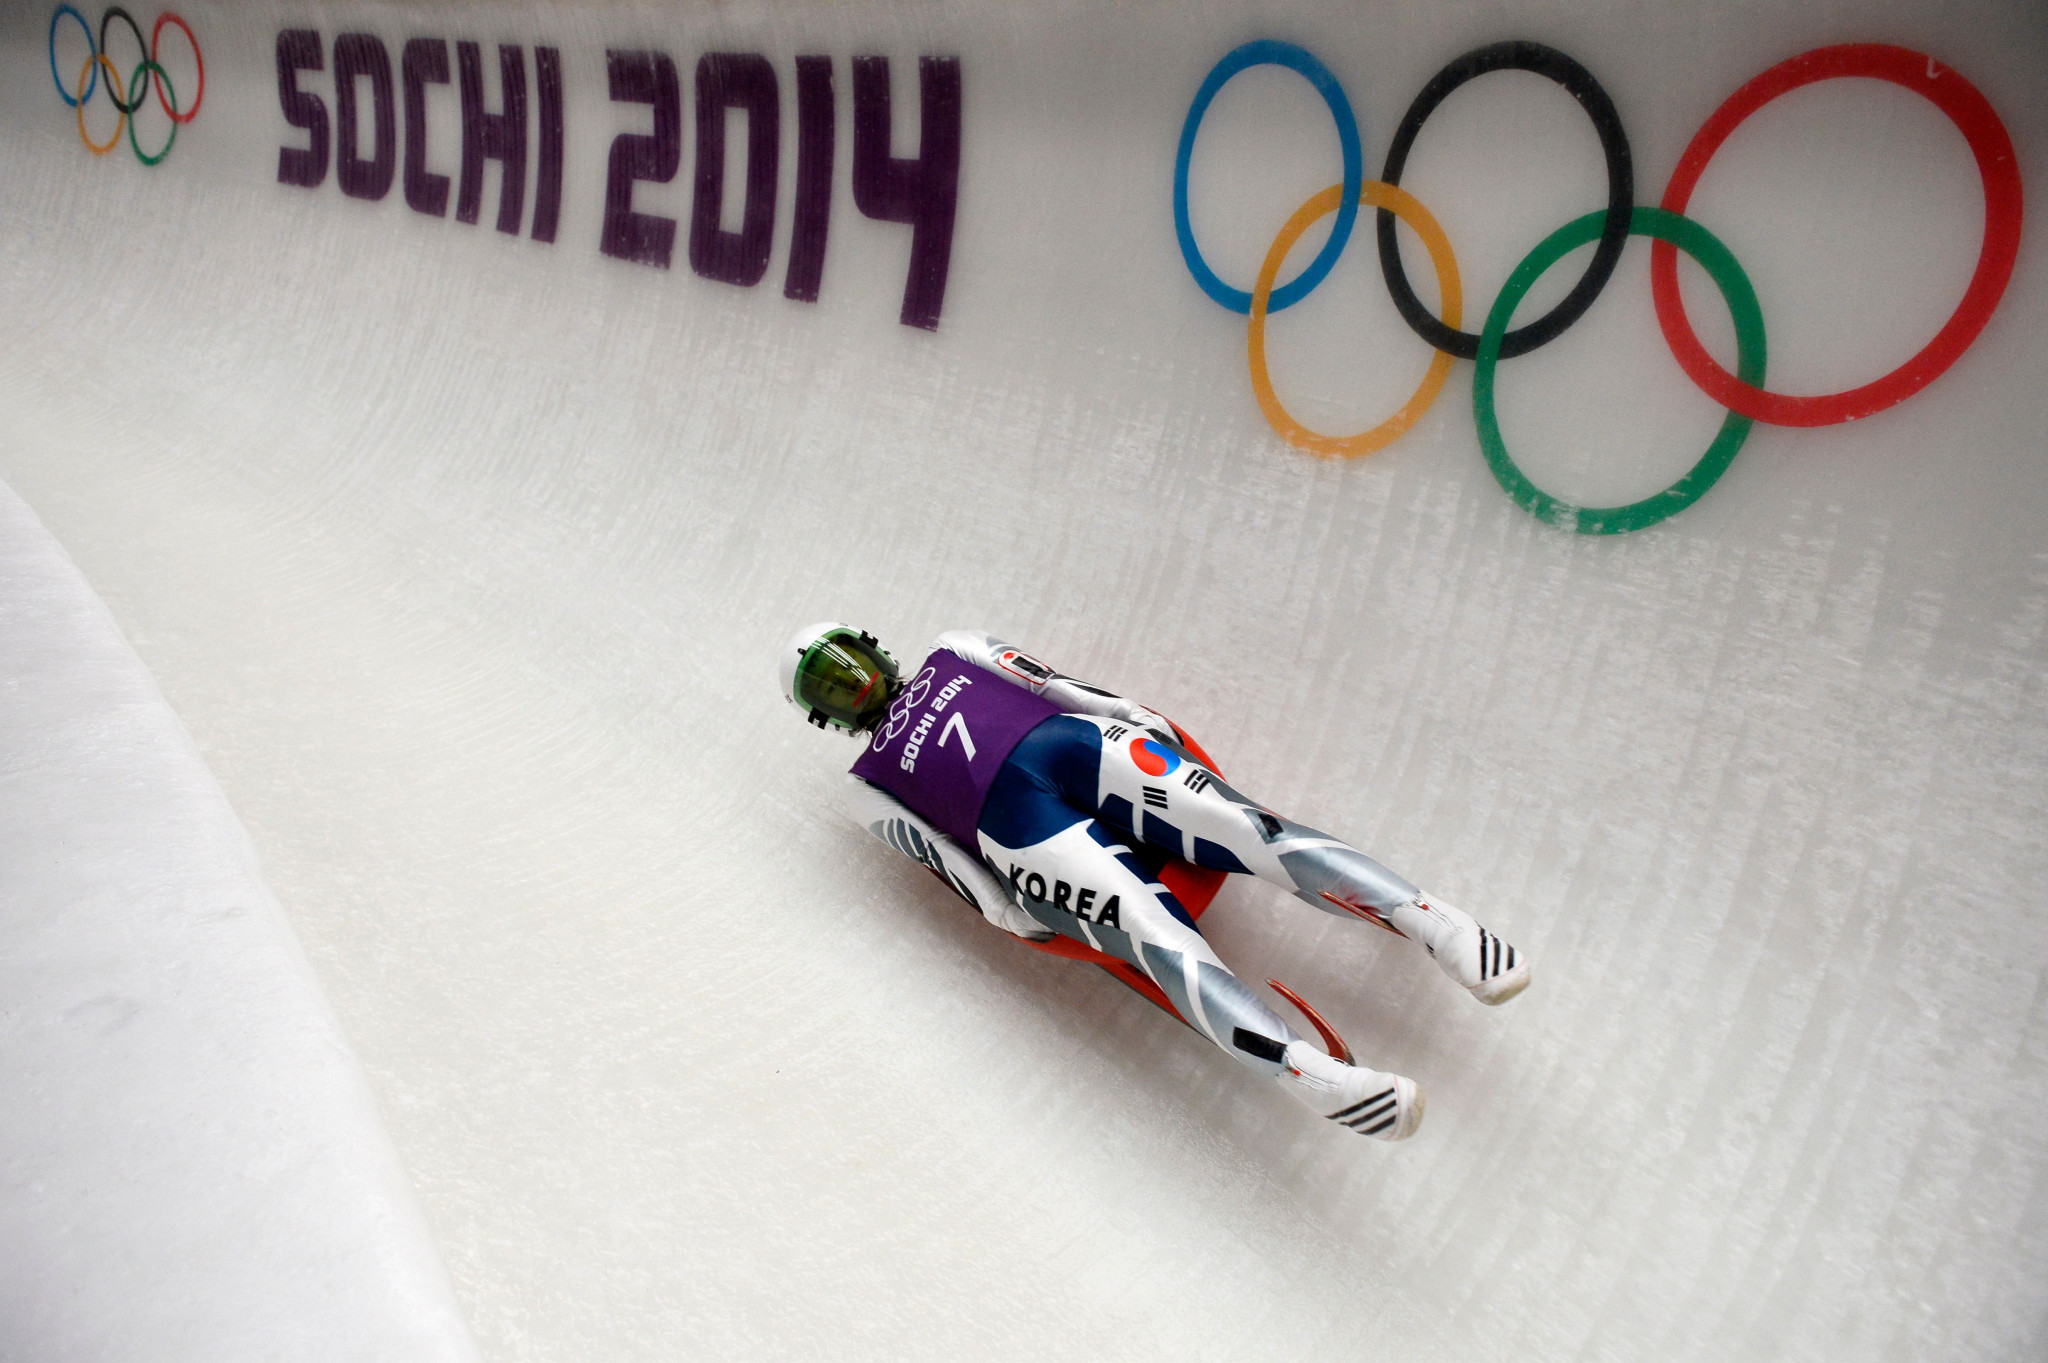 Sochi 2014's reported costs may have put off future bidders ©Getty Images